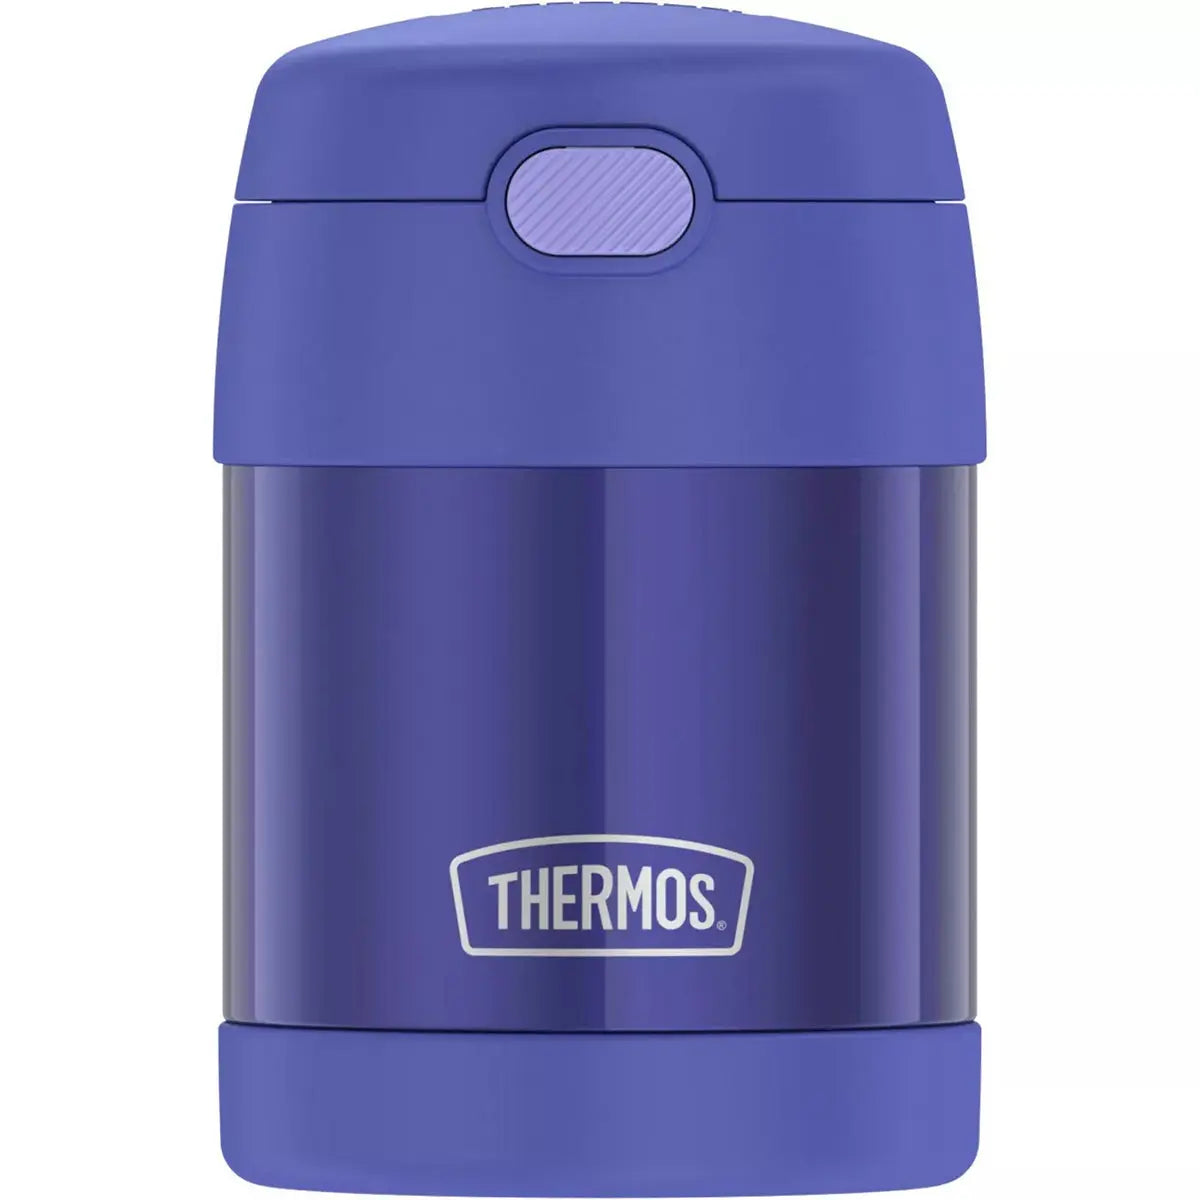 Thermos 10 oz. Kid's Funtainer Vacuum Insulated Stainless Steel Food Jar